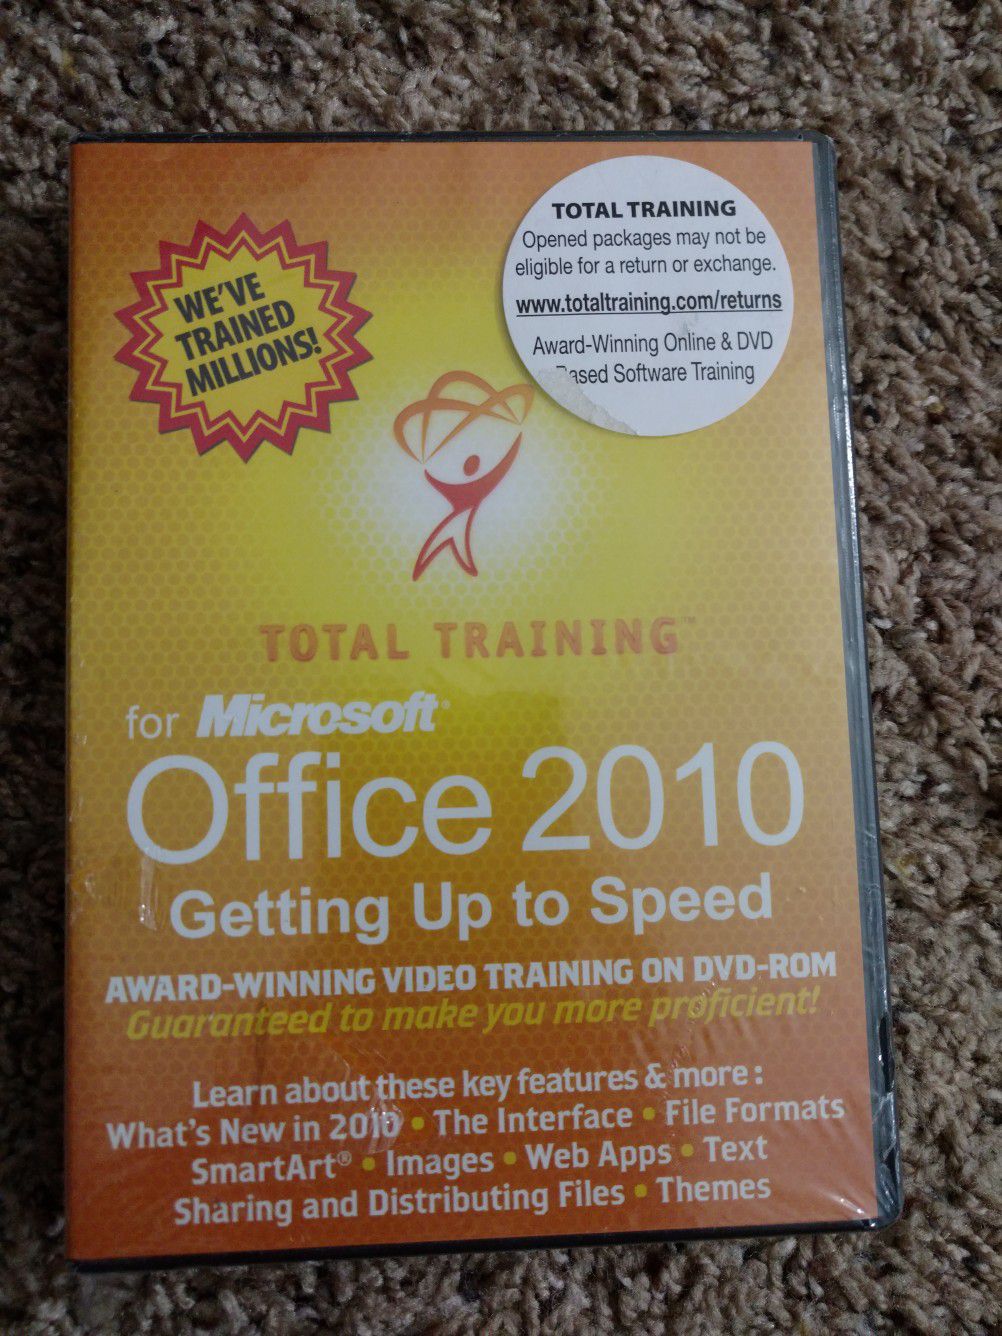 Microsoft Office 2010 training complete